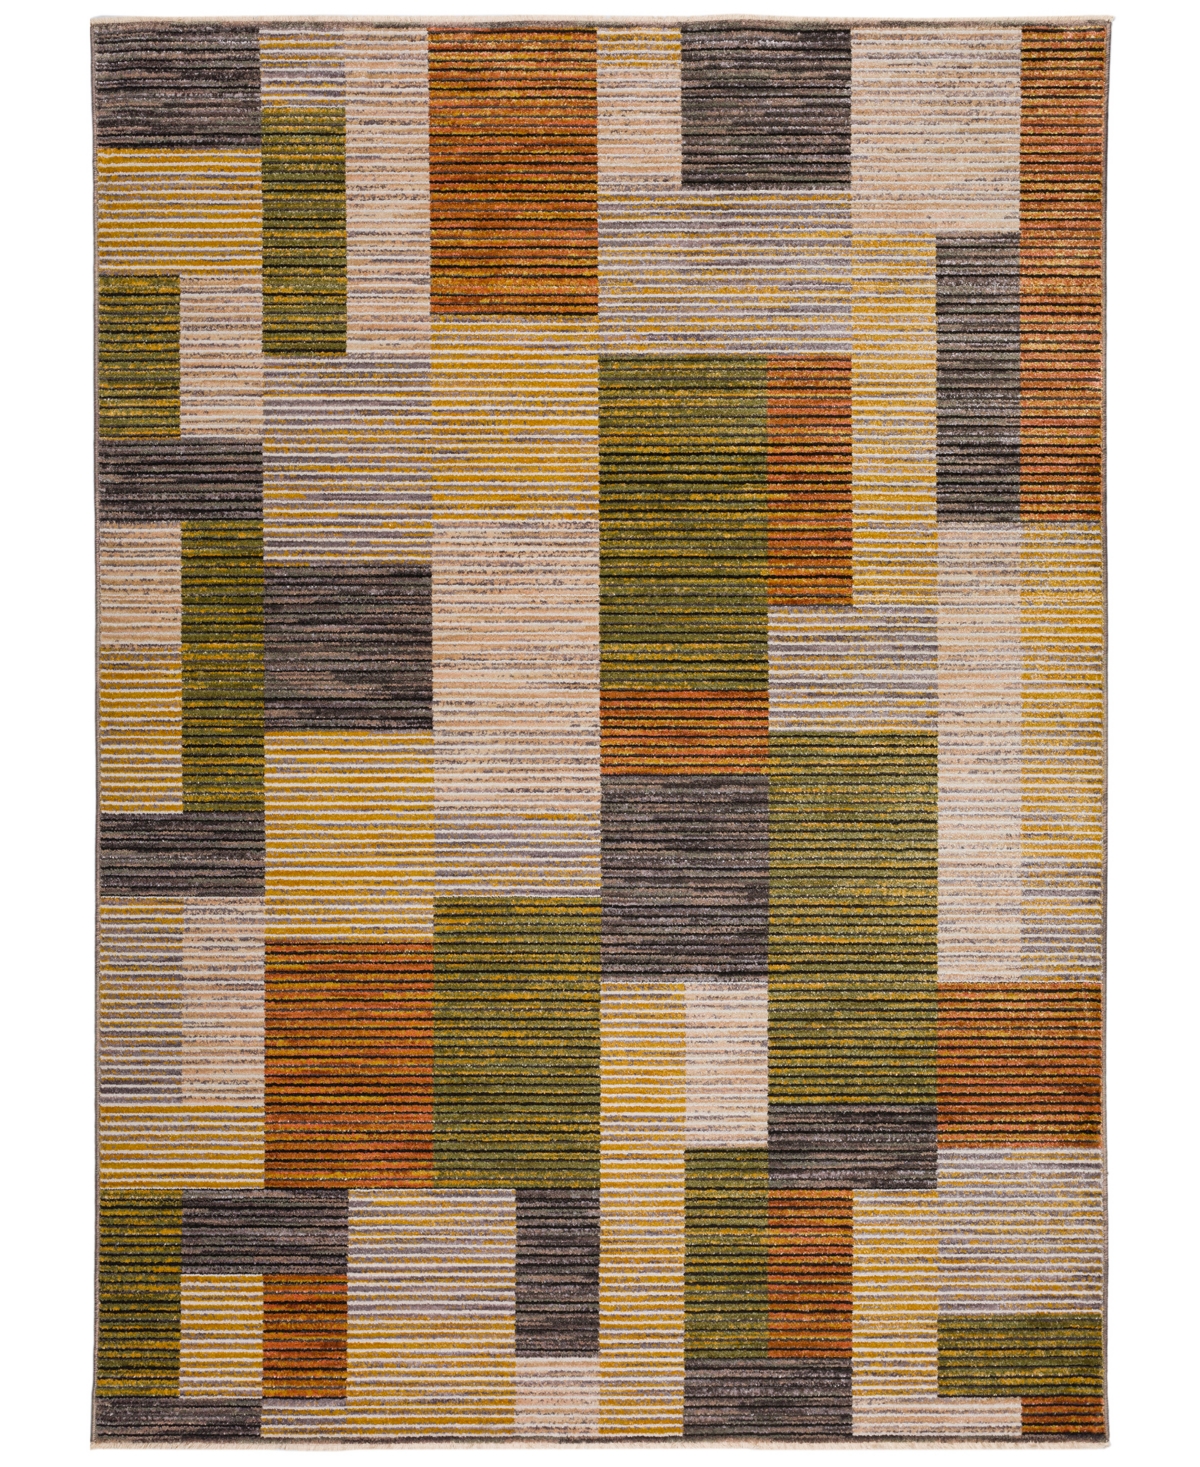 D Style Sergey Sgy5 9' X 12'6" Area Rug In Multi